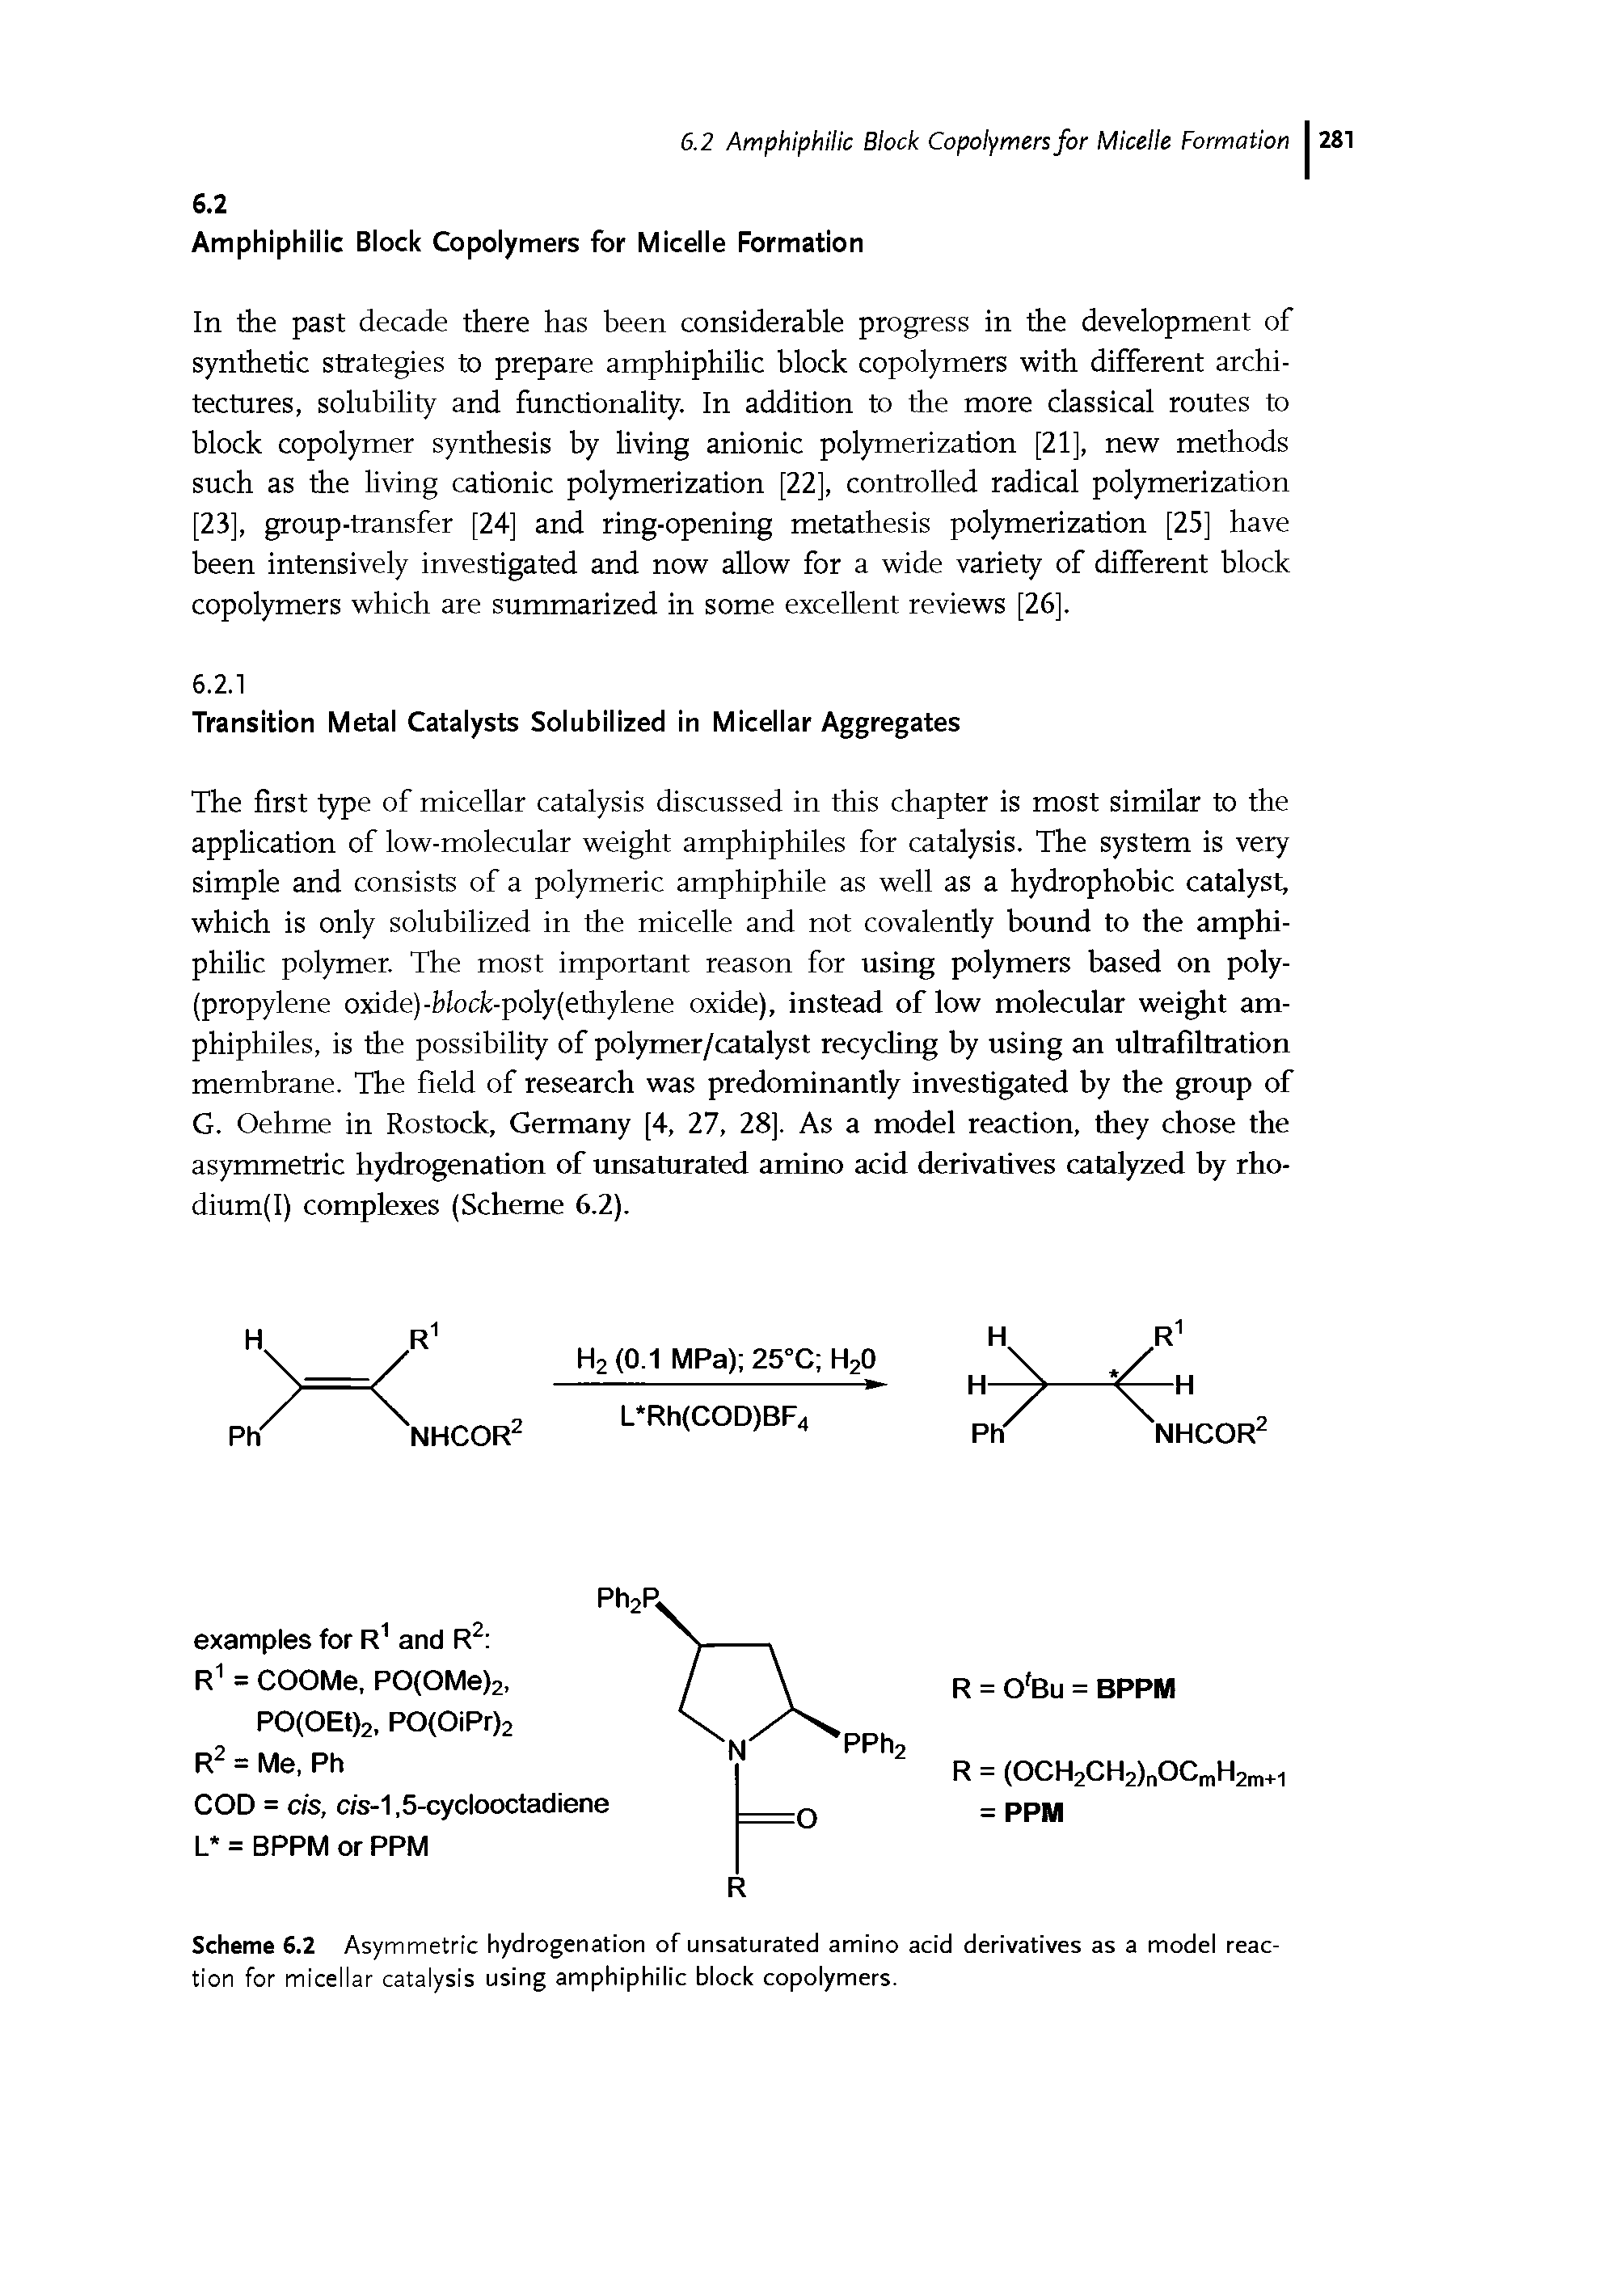 Scheme 6.2 Asymmetric hydrogenation of unsaturated amino acid derivatives as a model reaction for micellar catalysis using amphiphilic block copolymers.